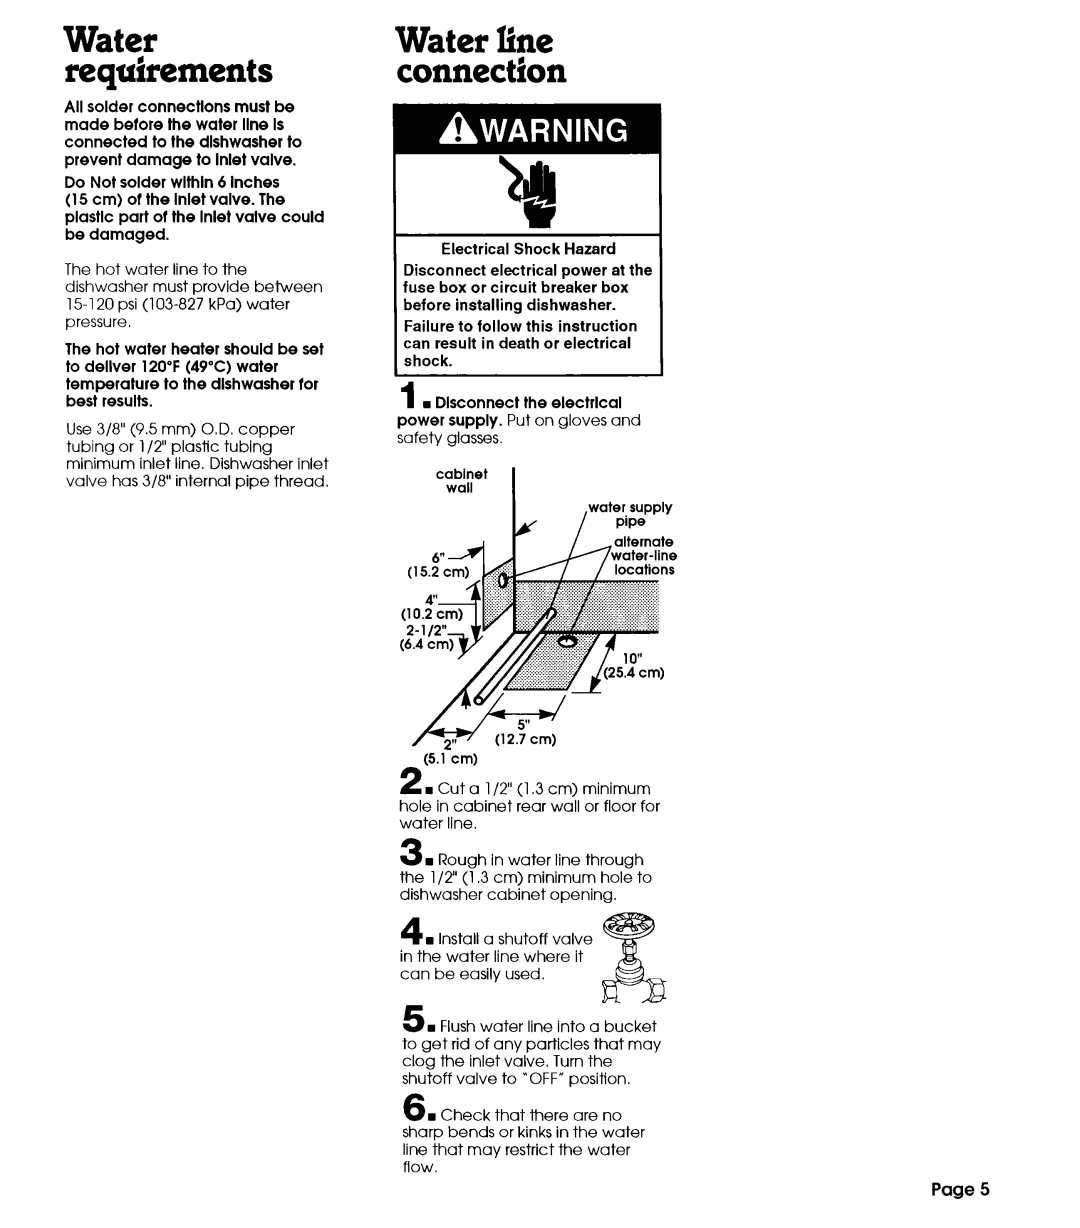 Whirlpool 801 installation instructions Water requirements, Water line connection, Page 